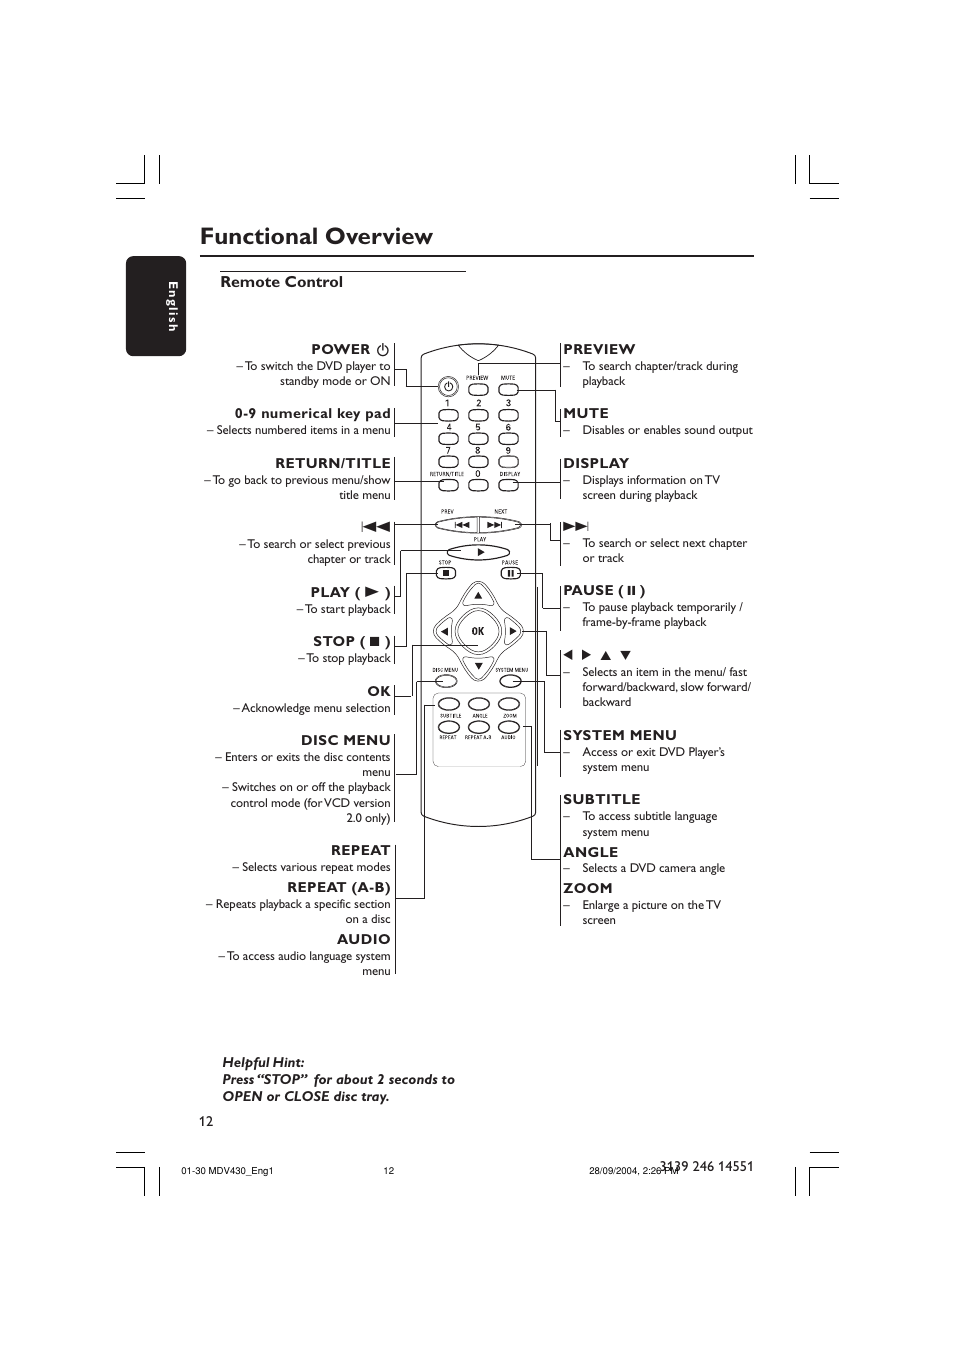 Functional overview | Philips Magnavox MDV430 User Manual | Page 12 / 30